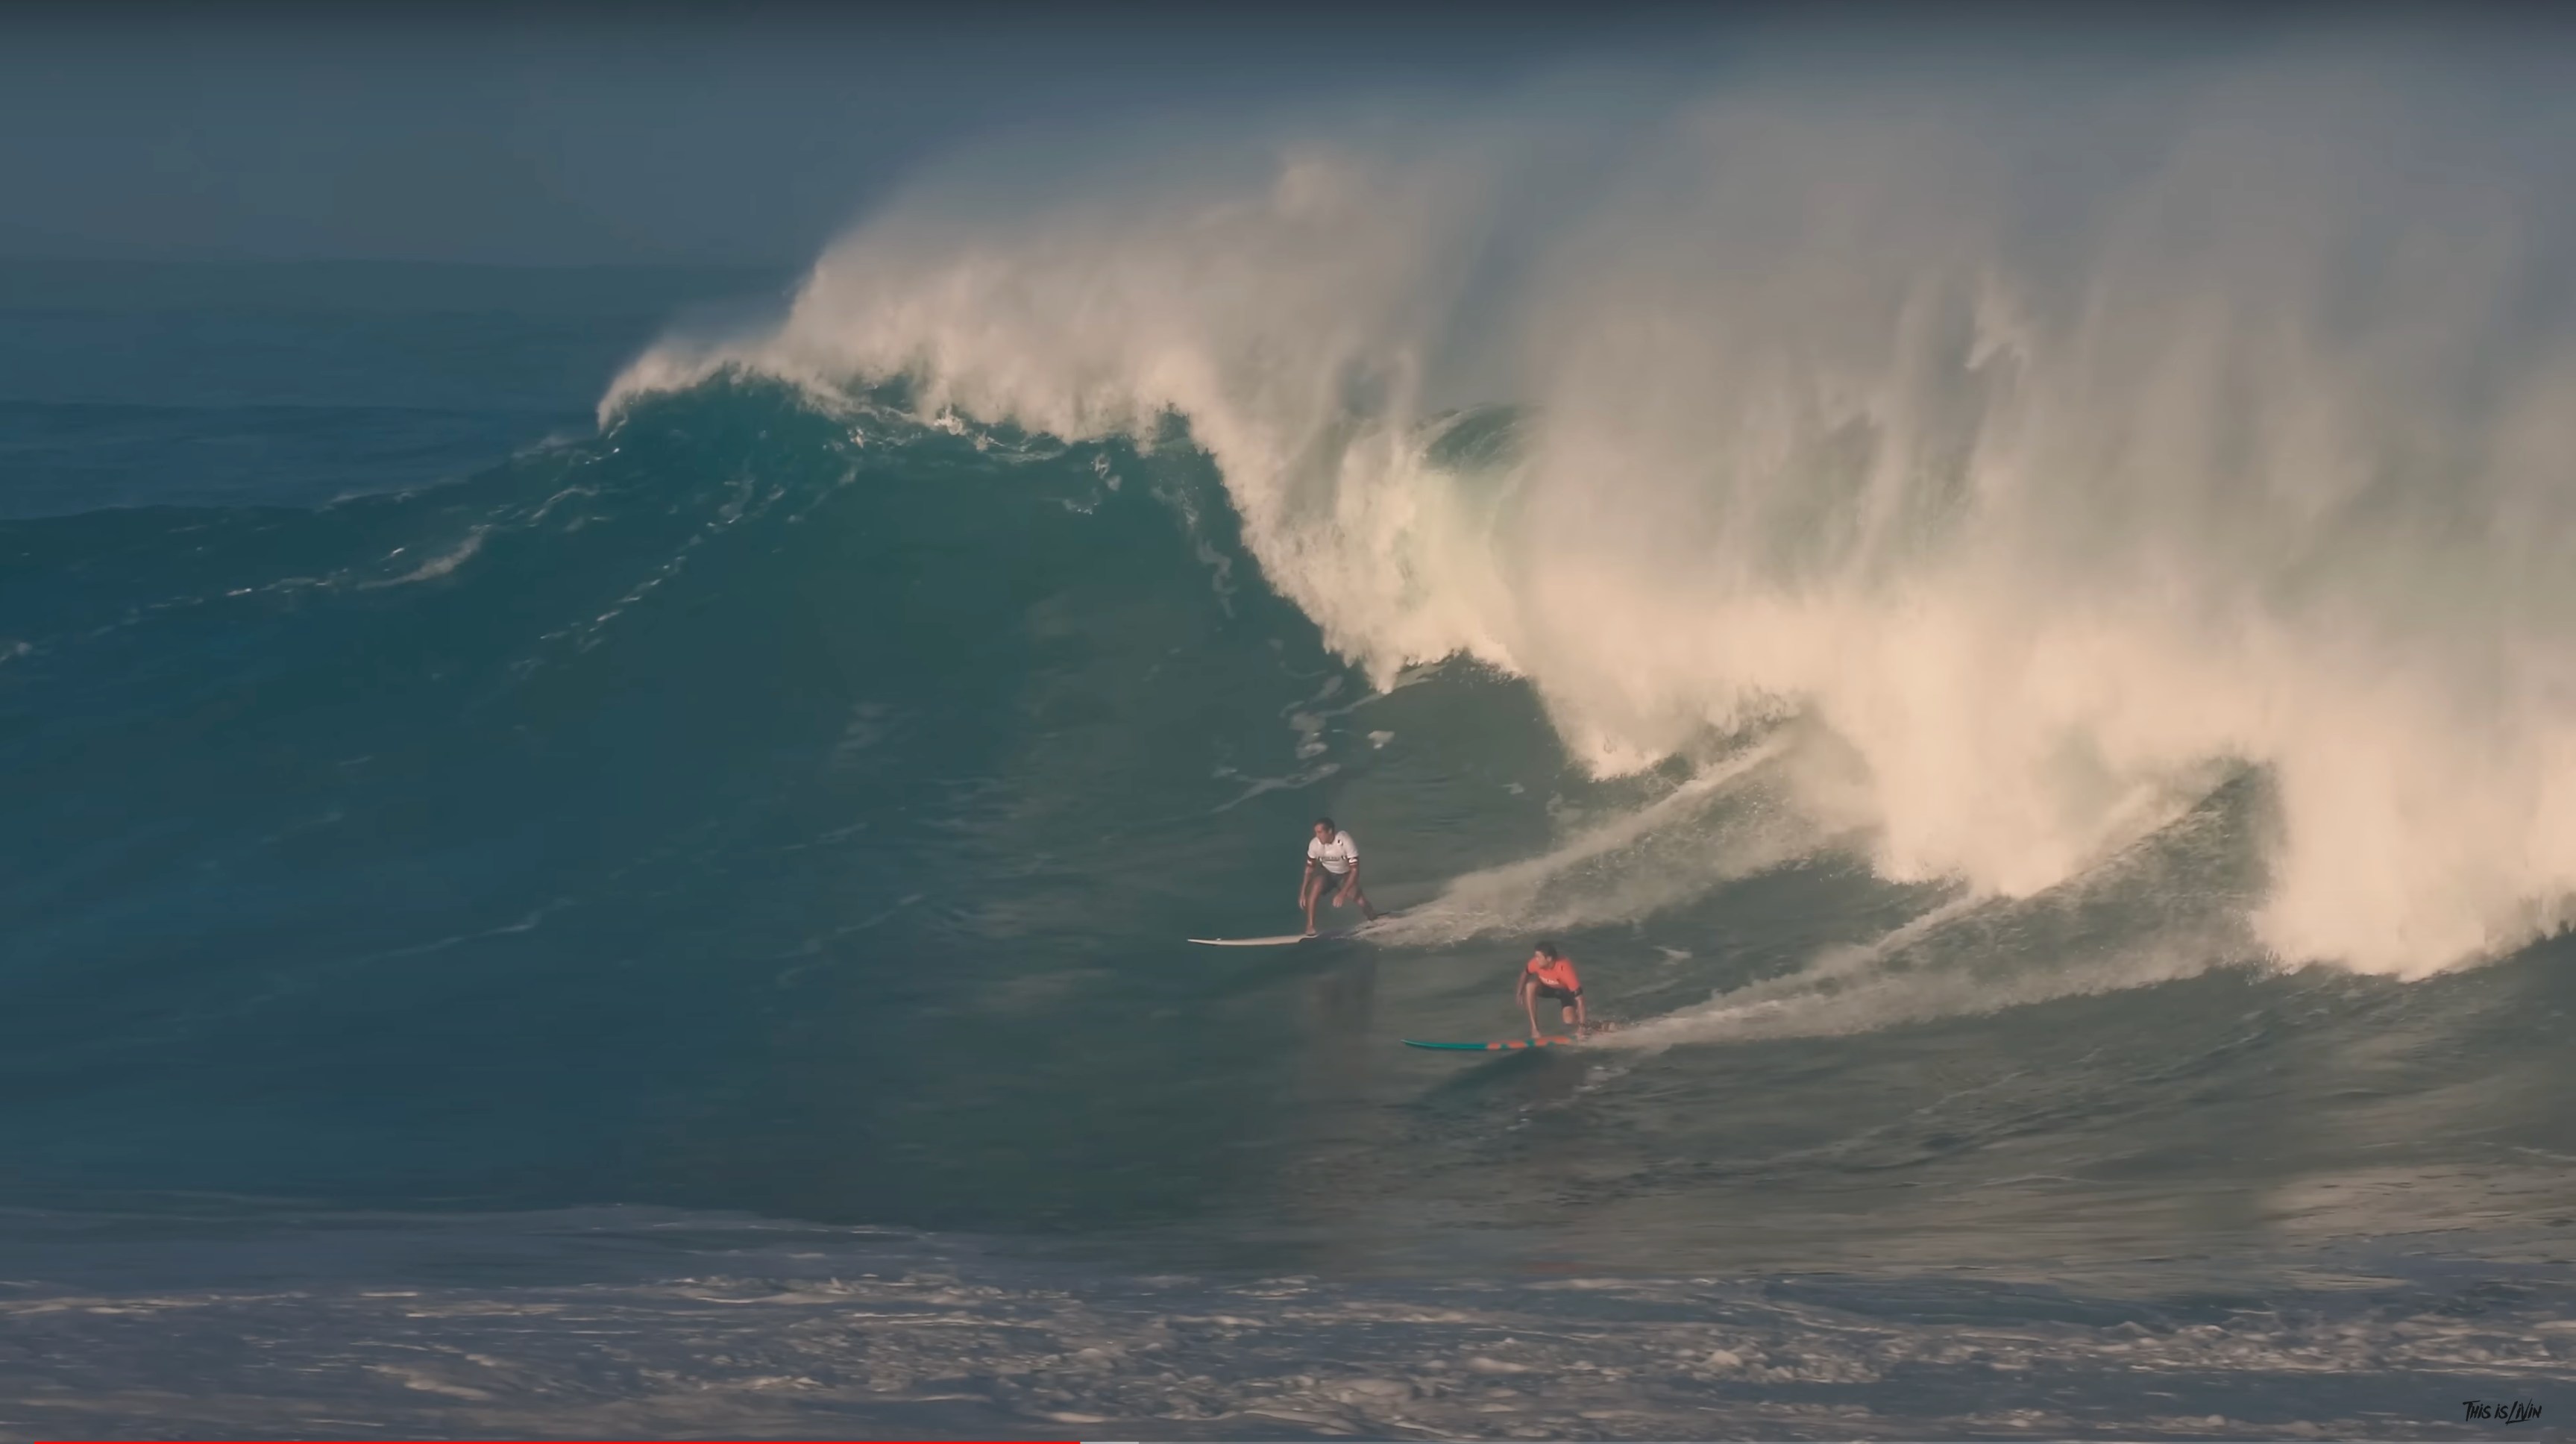 Load video: Big wave surfer Koa Rothman surfs in The Eddie Aikau surfing competition, named after legendary lifeguard and surfer Eddie Aikau.